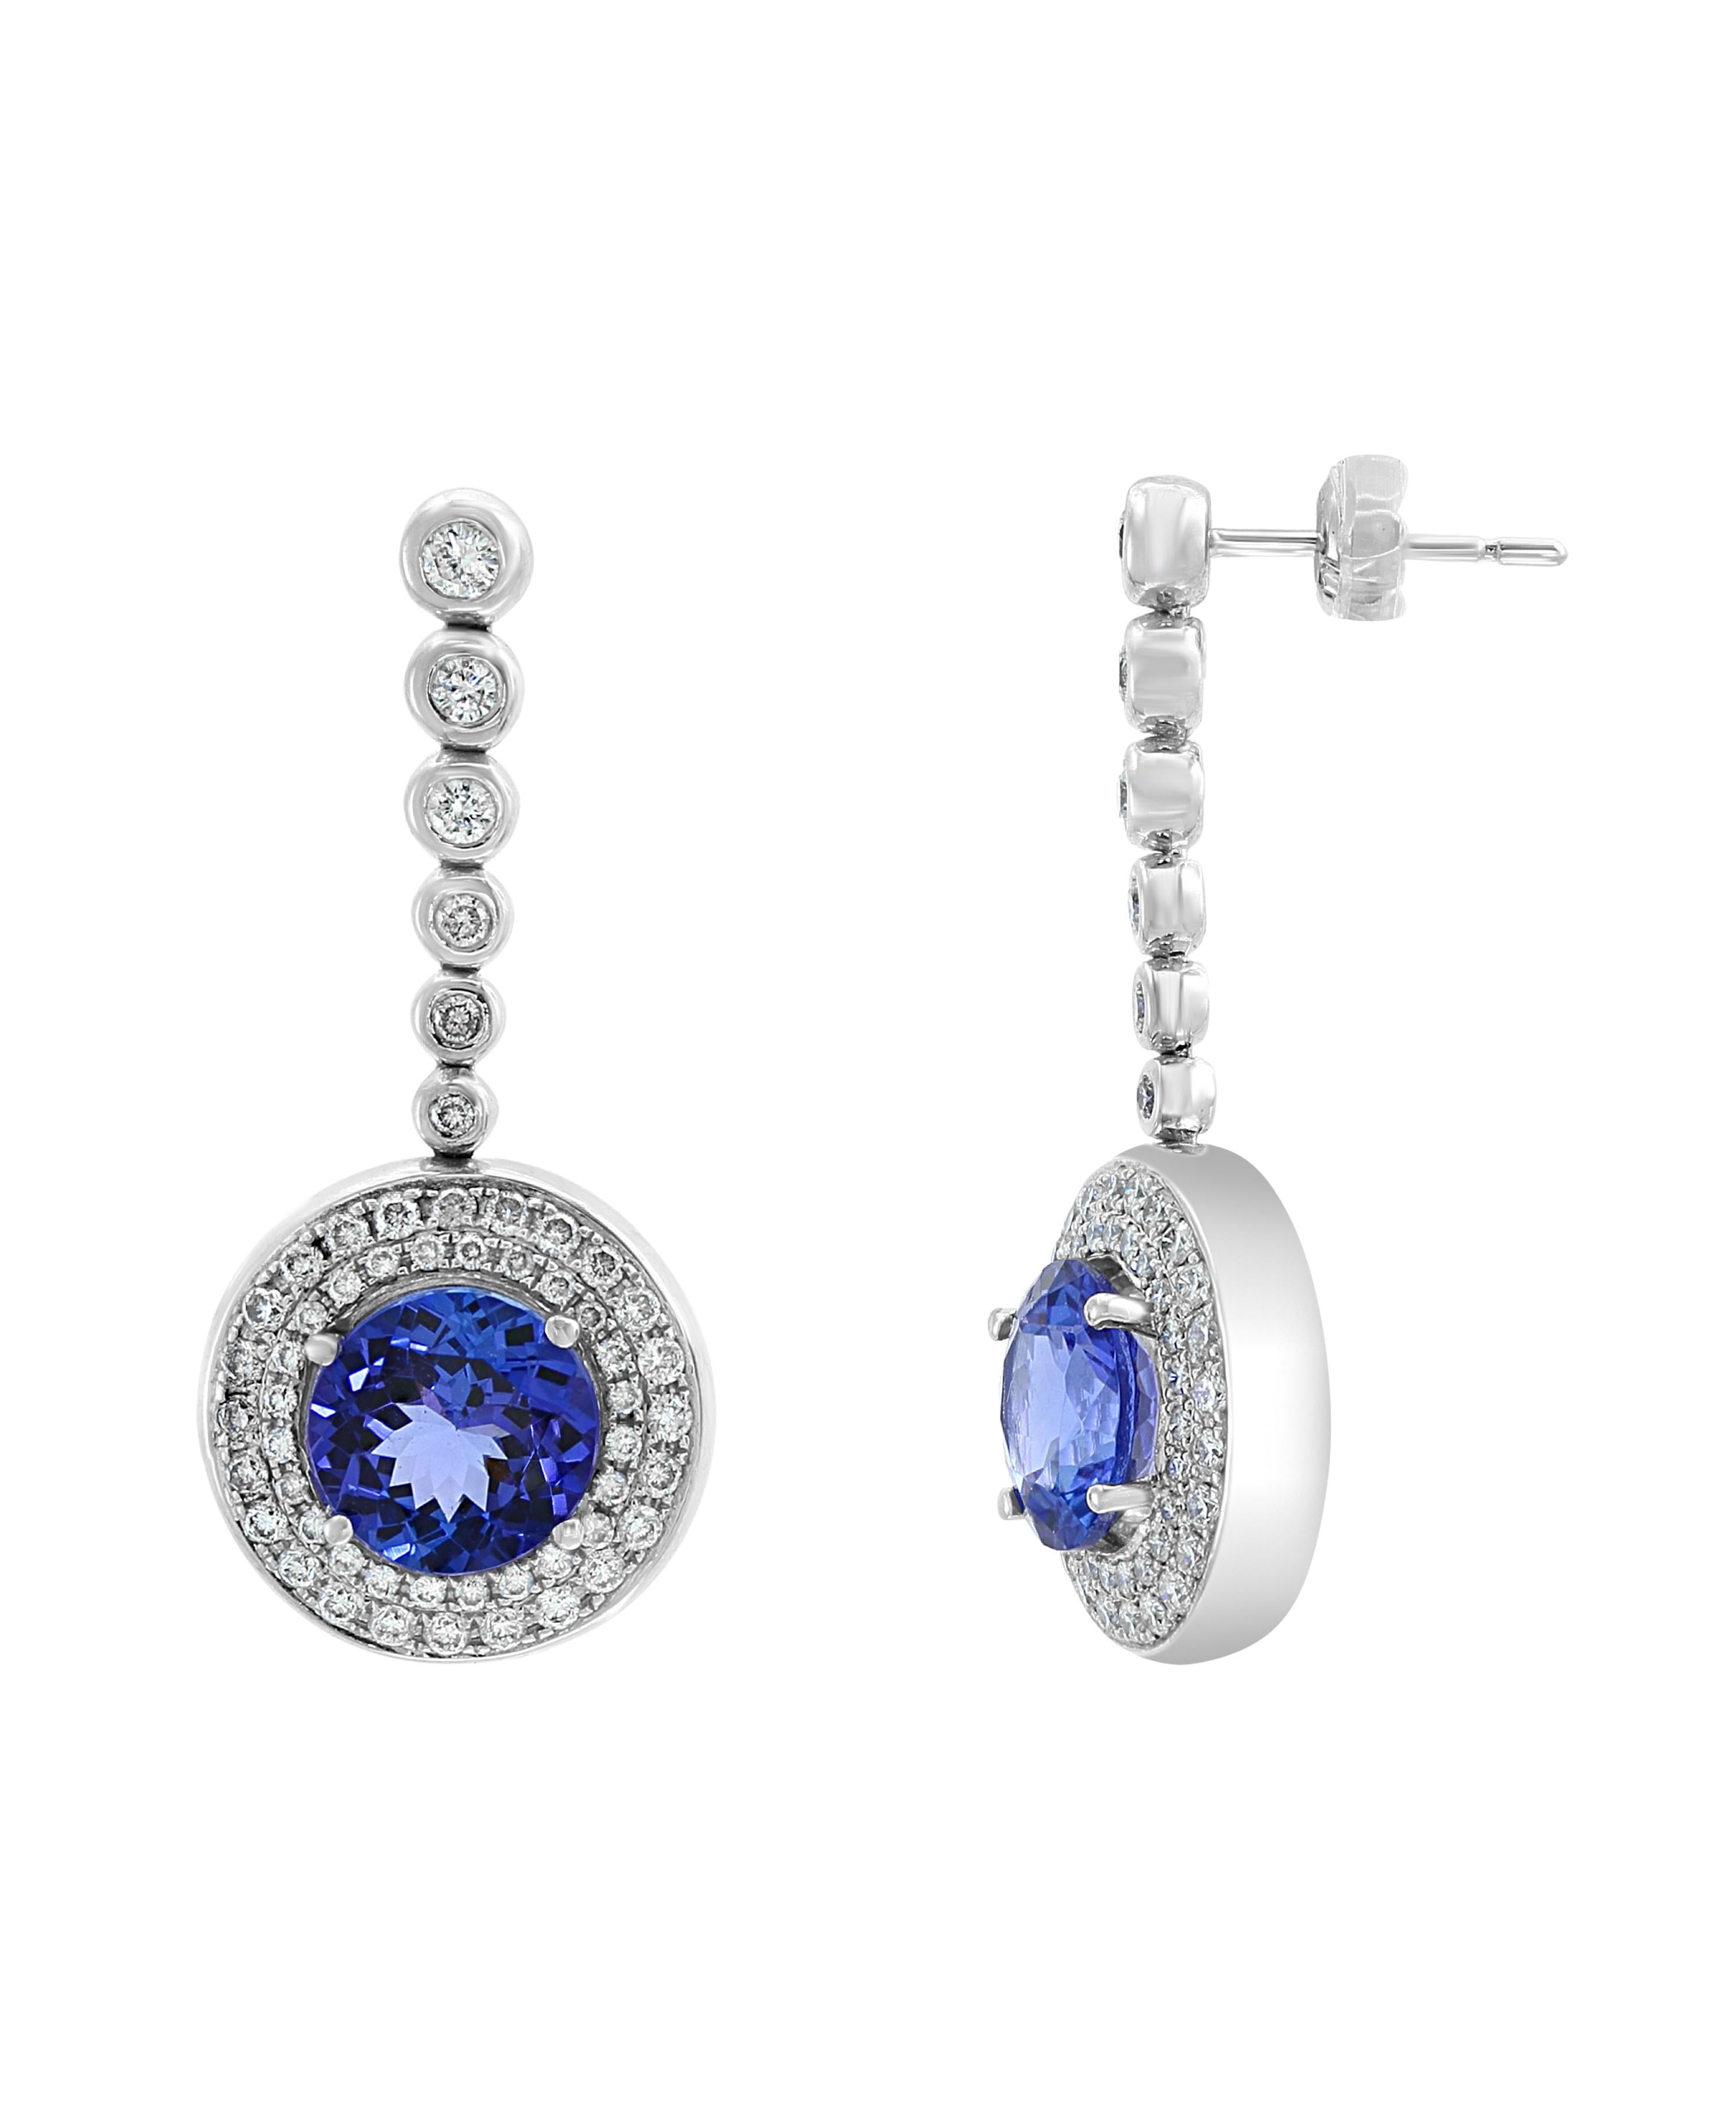 5.6 Carat  Round Tanzanite and Diamond Hanging or Cocktail Earring 18 Karat White Gold
perfect pair made in  18 carat White gold . 
18 K gold :13 Grams
 Diamonds: approximate 1.8 carats
Tanzanite: 5.6Carats
Its very hard to capture the true color